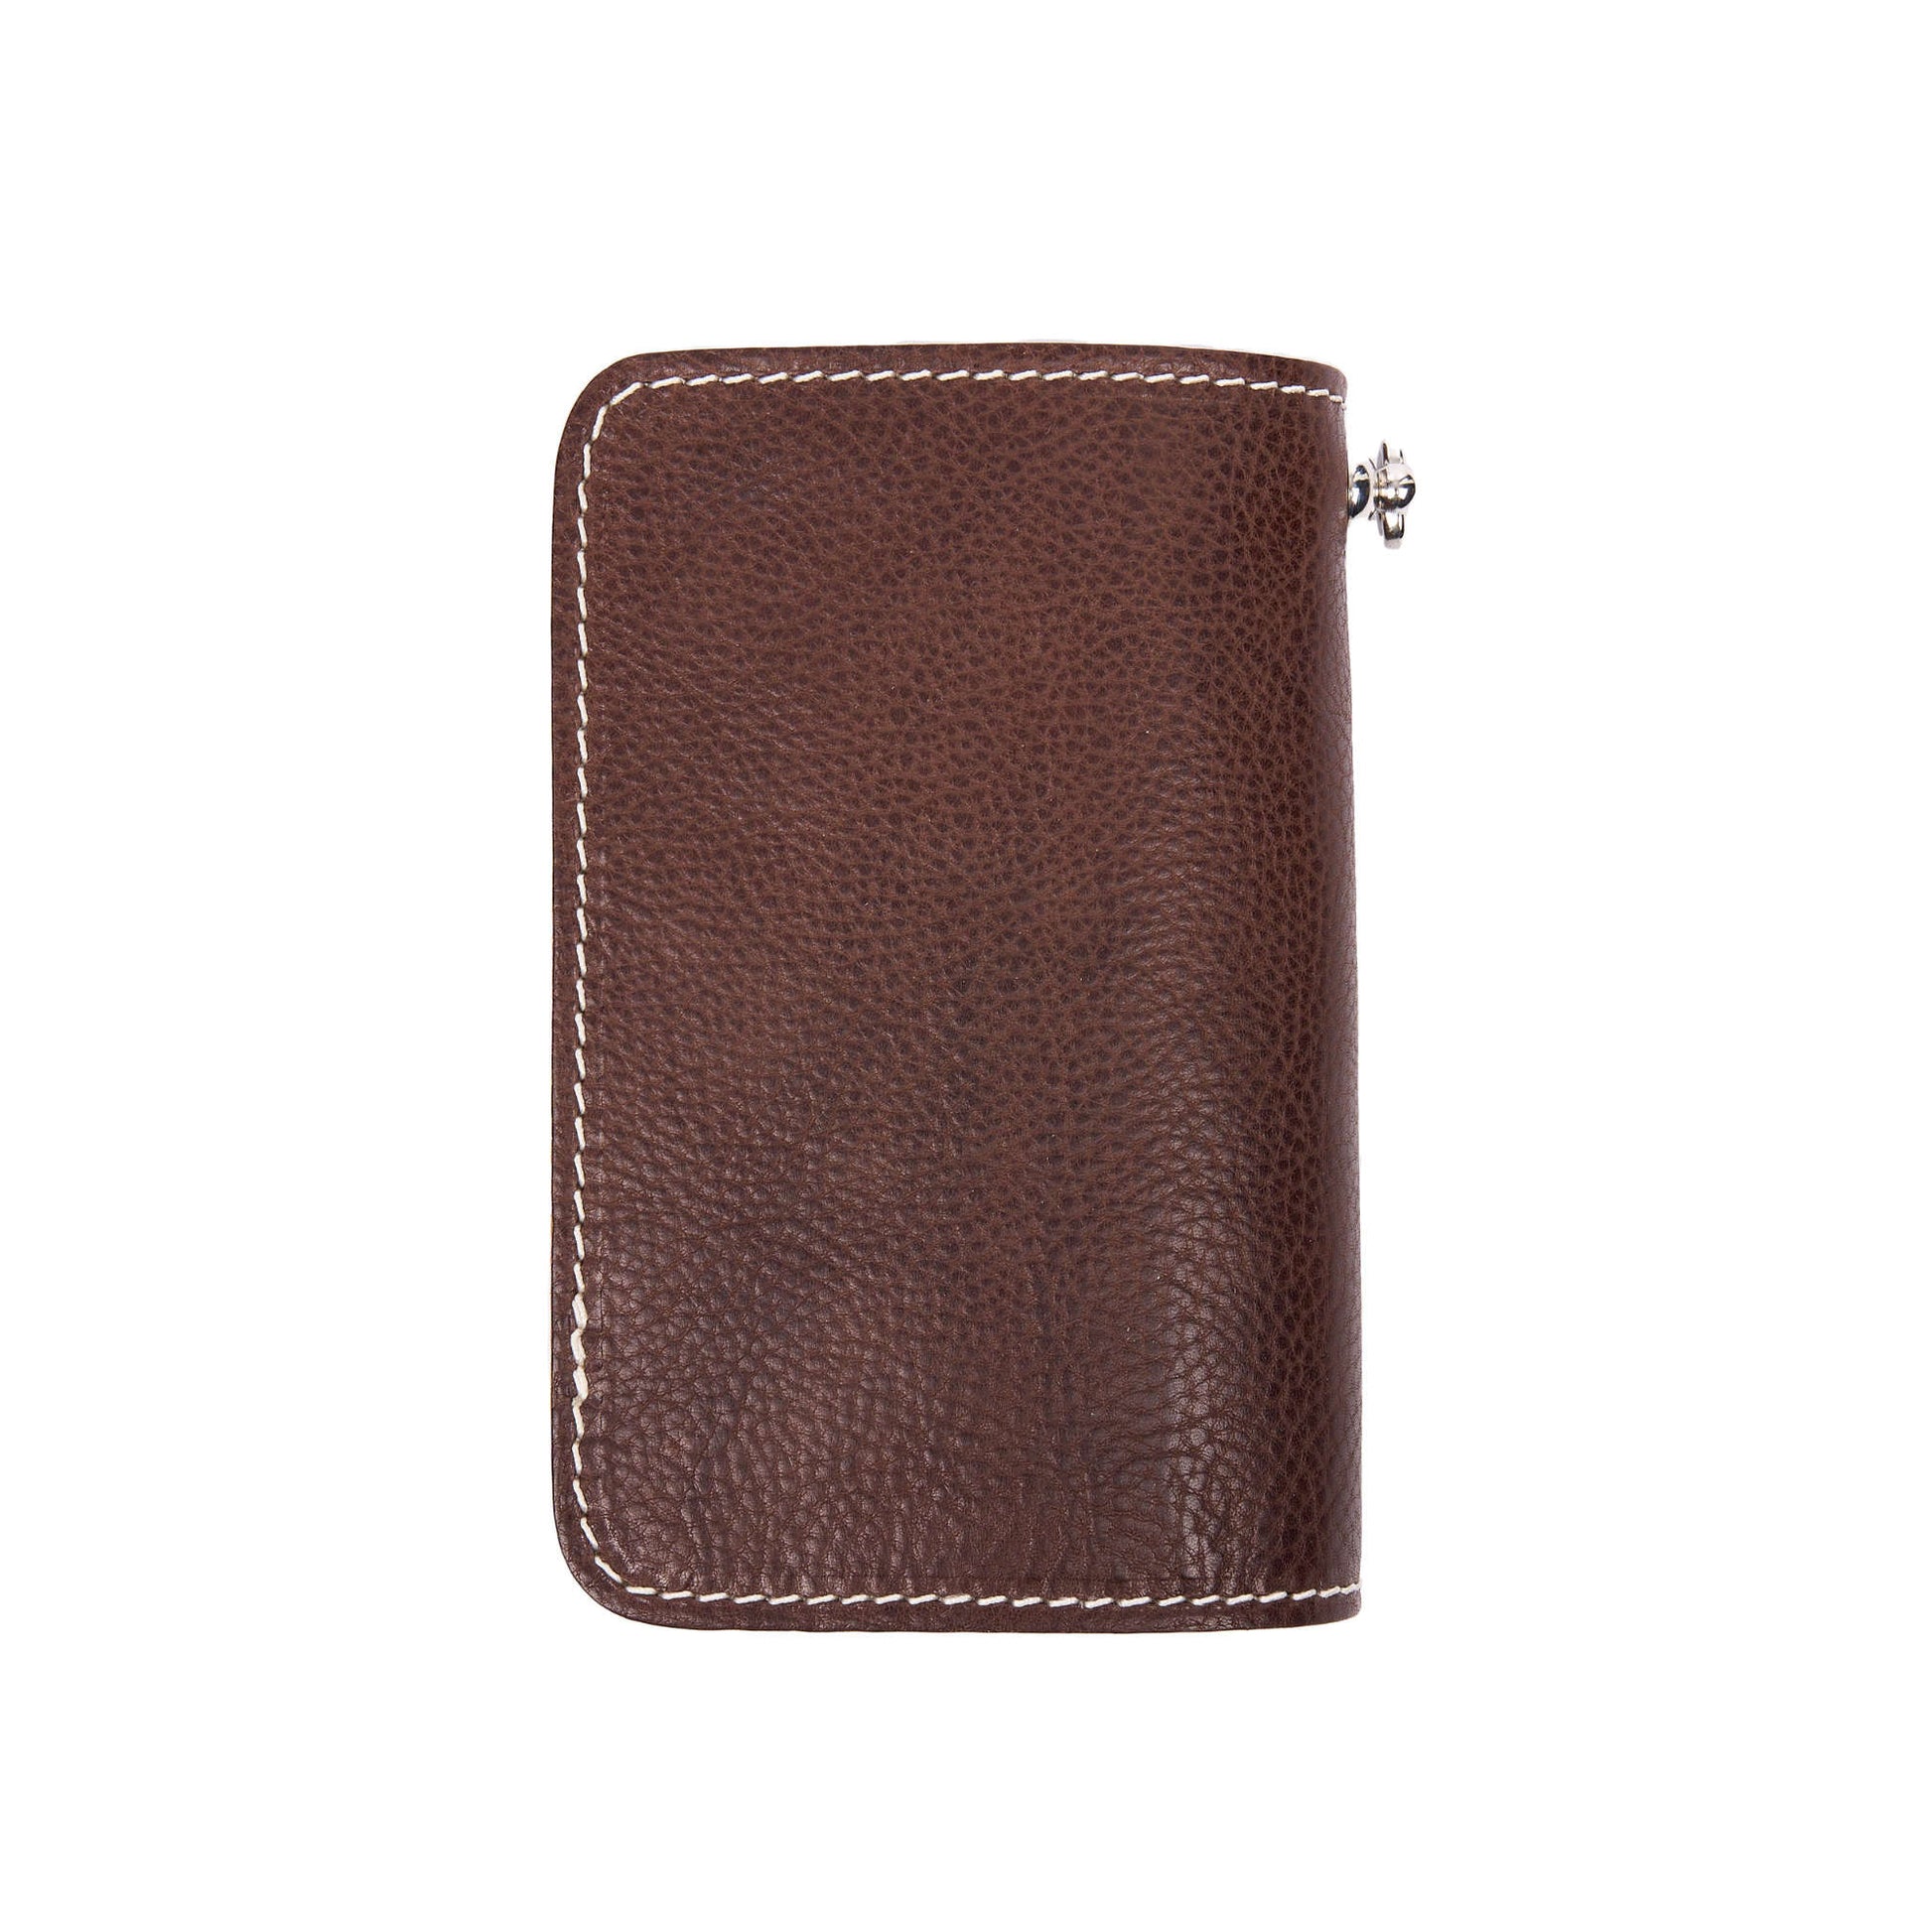 Pike Brothers 1965 Rider Wallet - Seal Brown